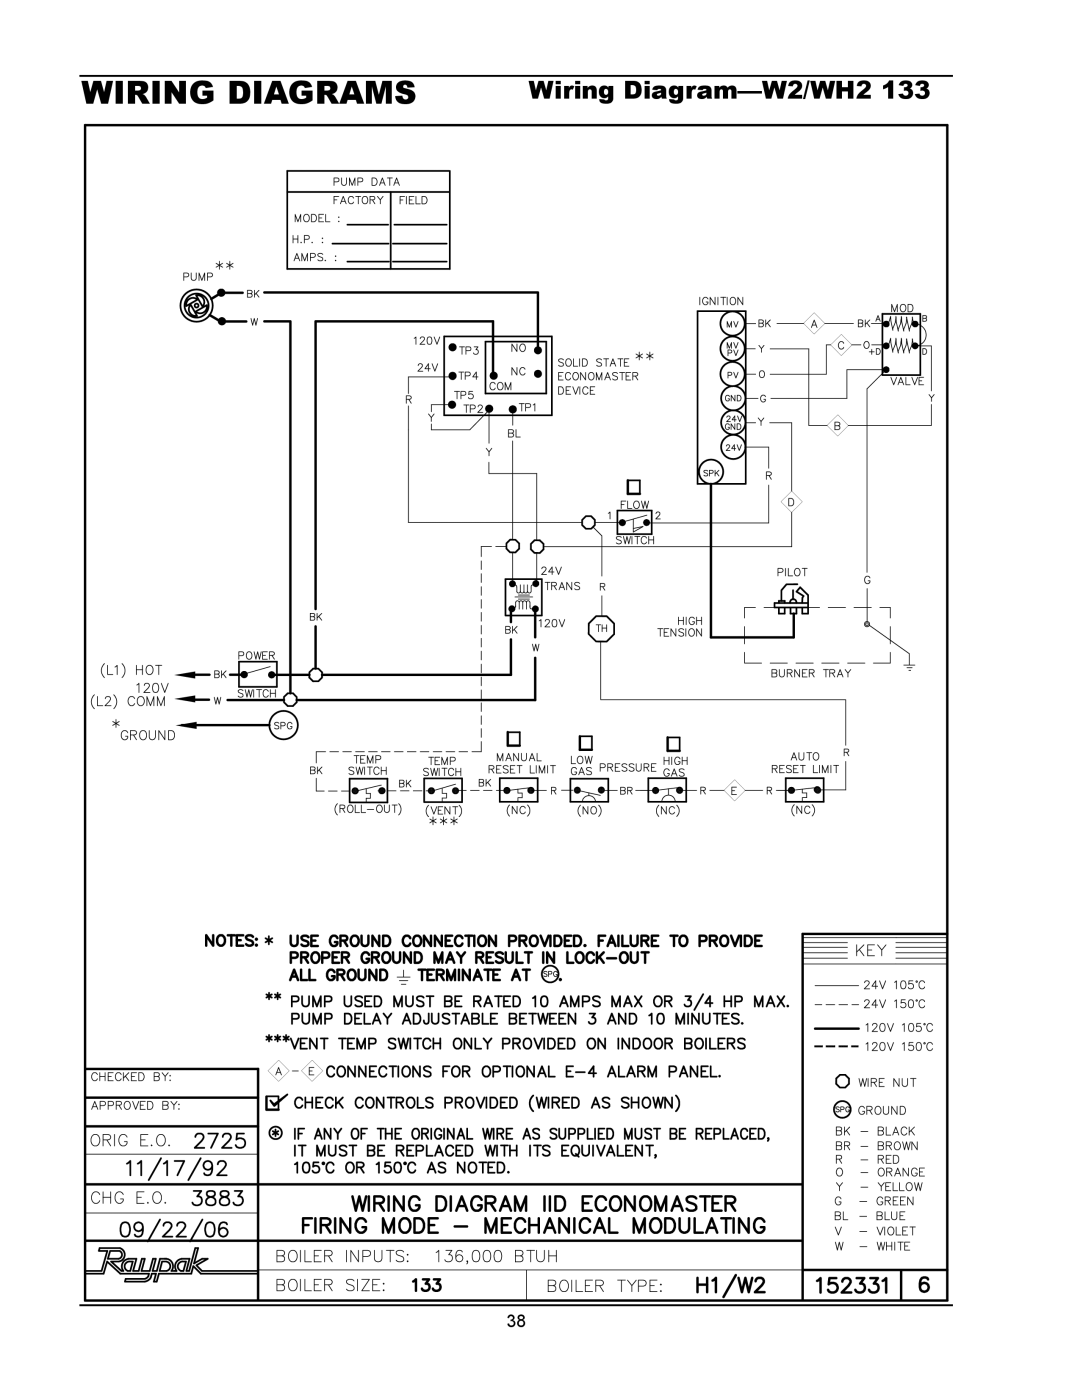 Raypak 1334001 operating instructions Wiring Diagrams, Wiring Diagram-W2/WH2133 